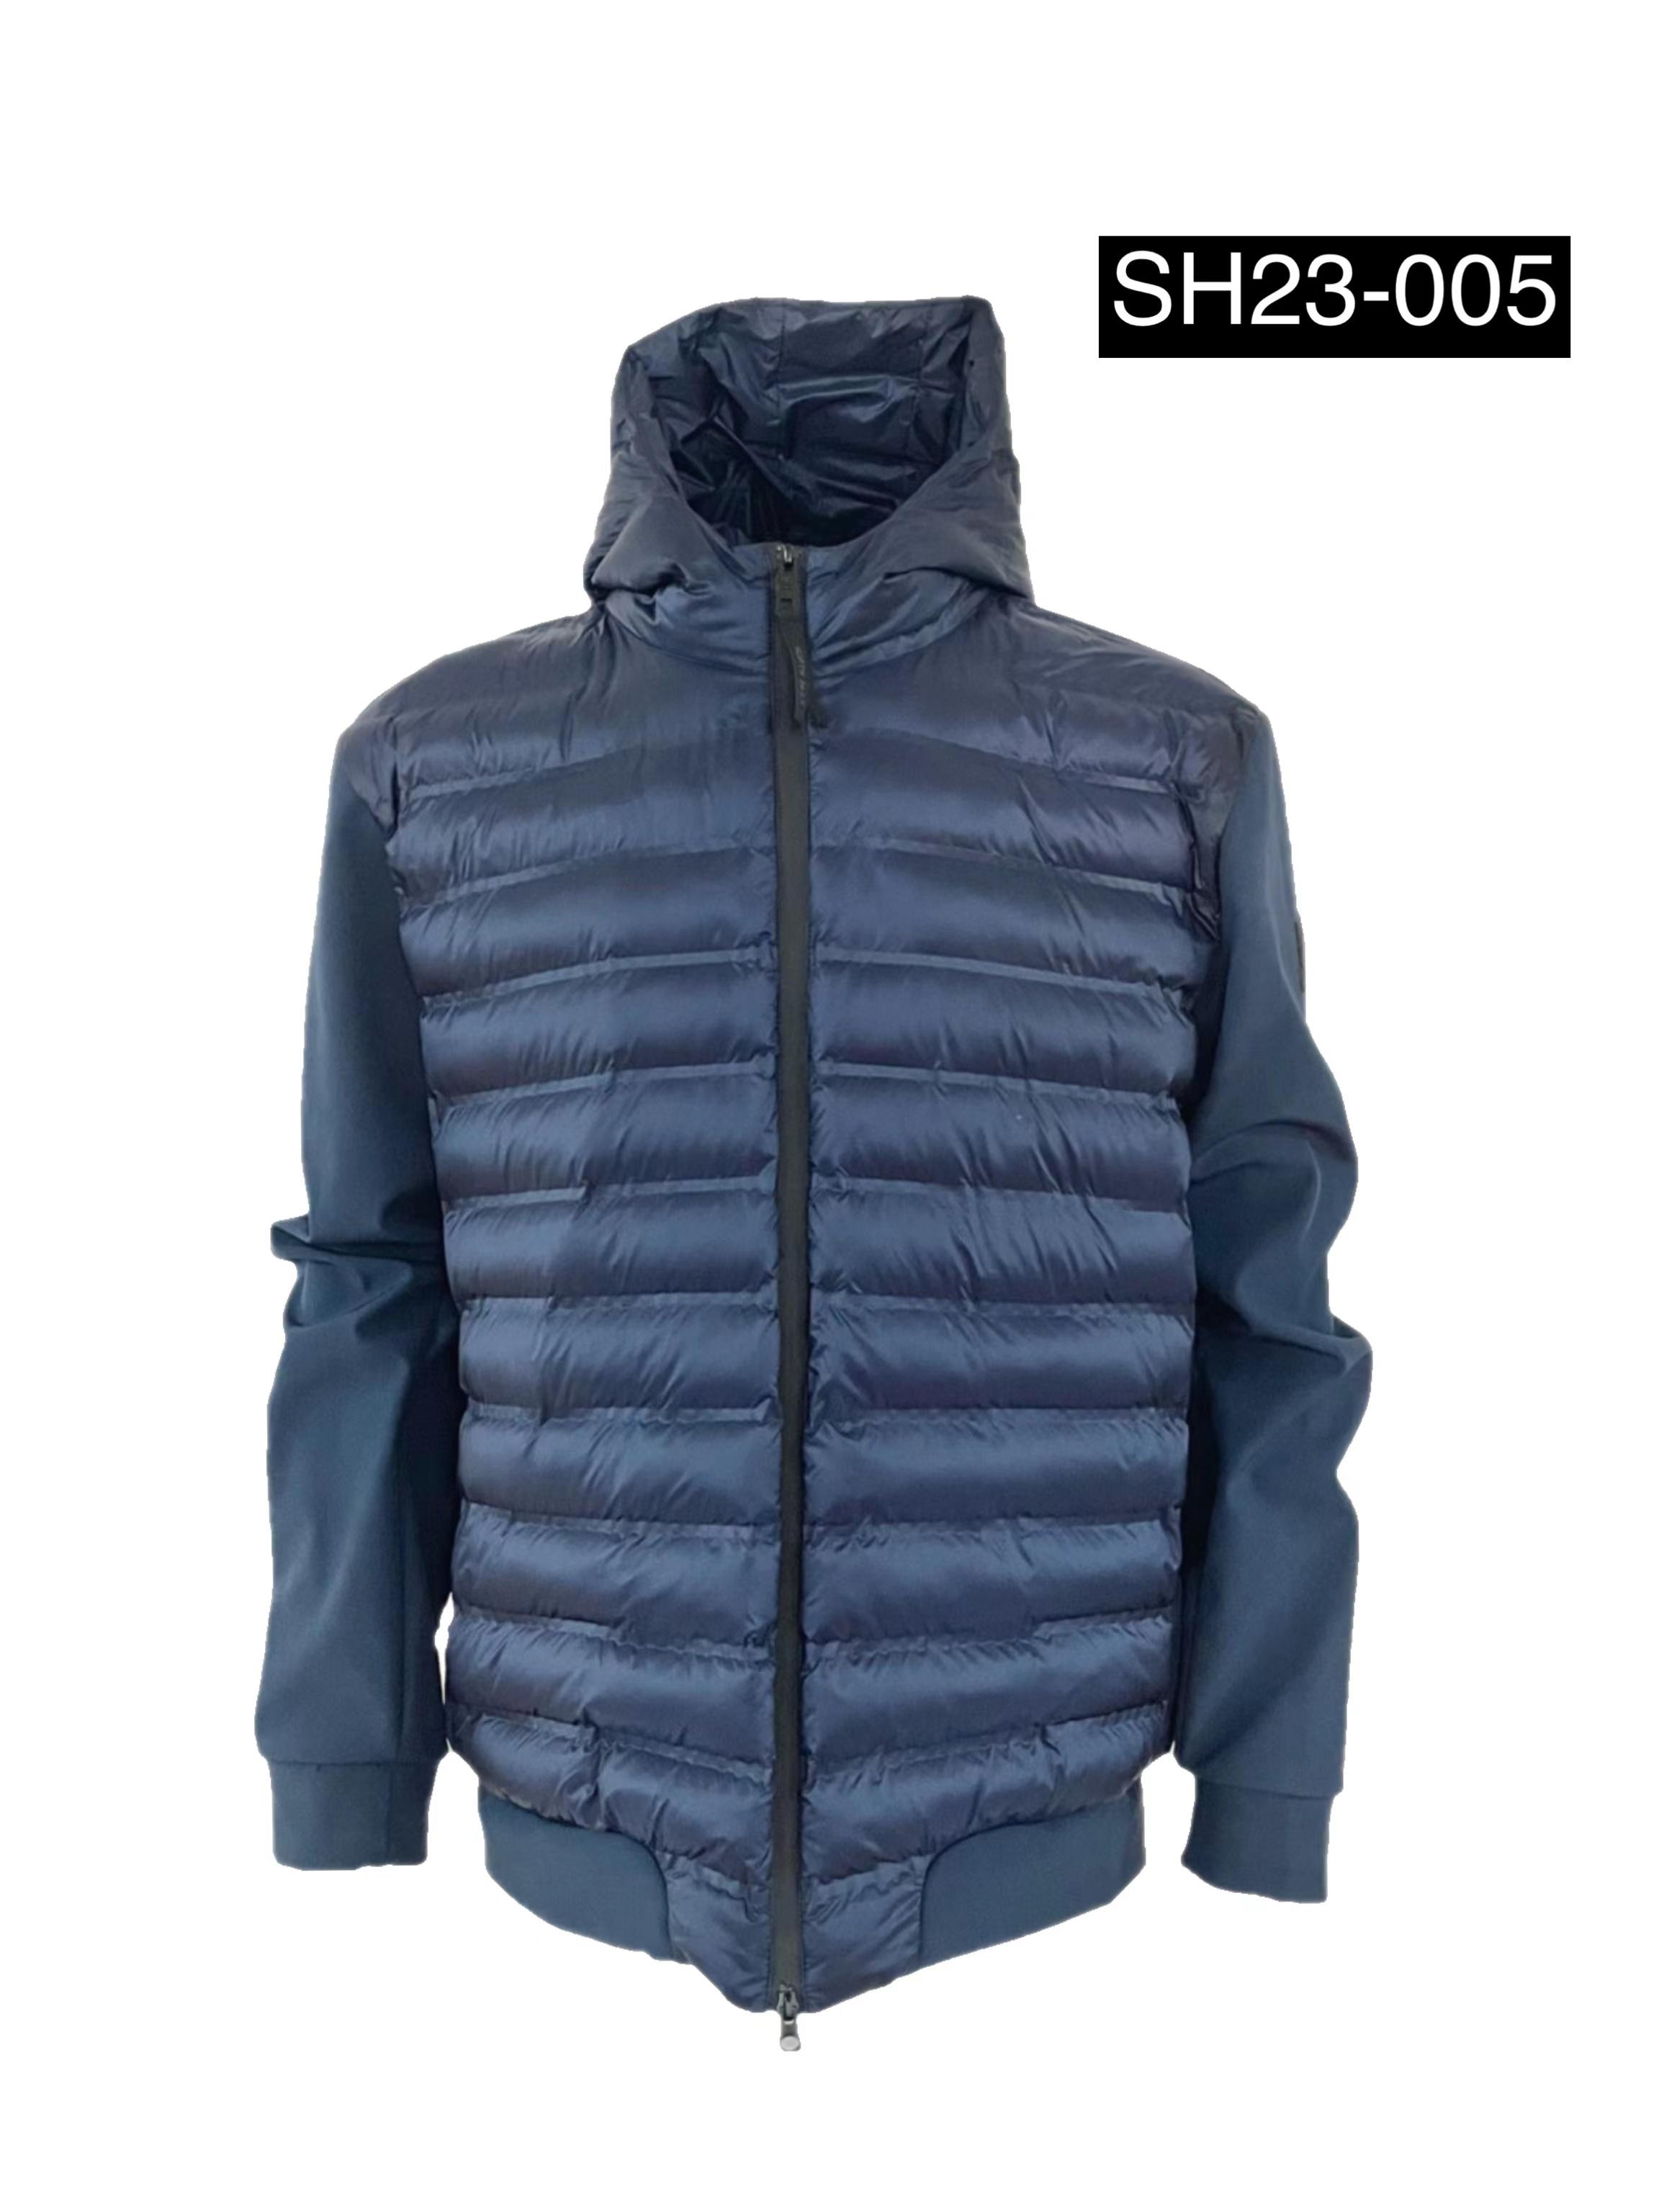 Insulated Jackets SH23-005